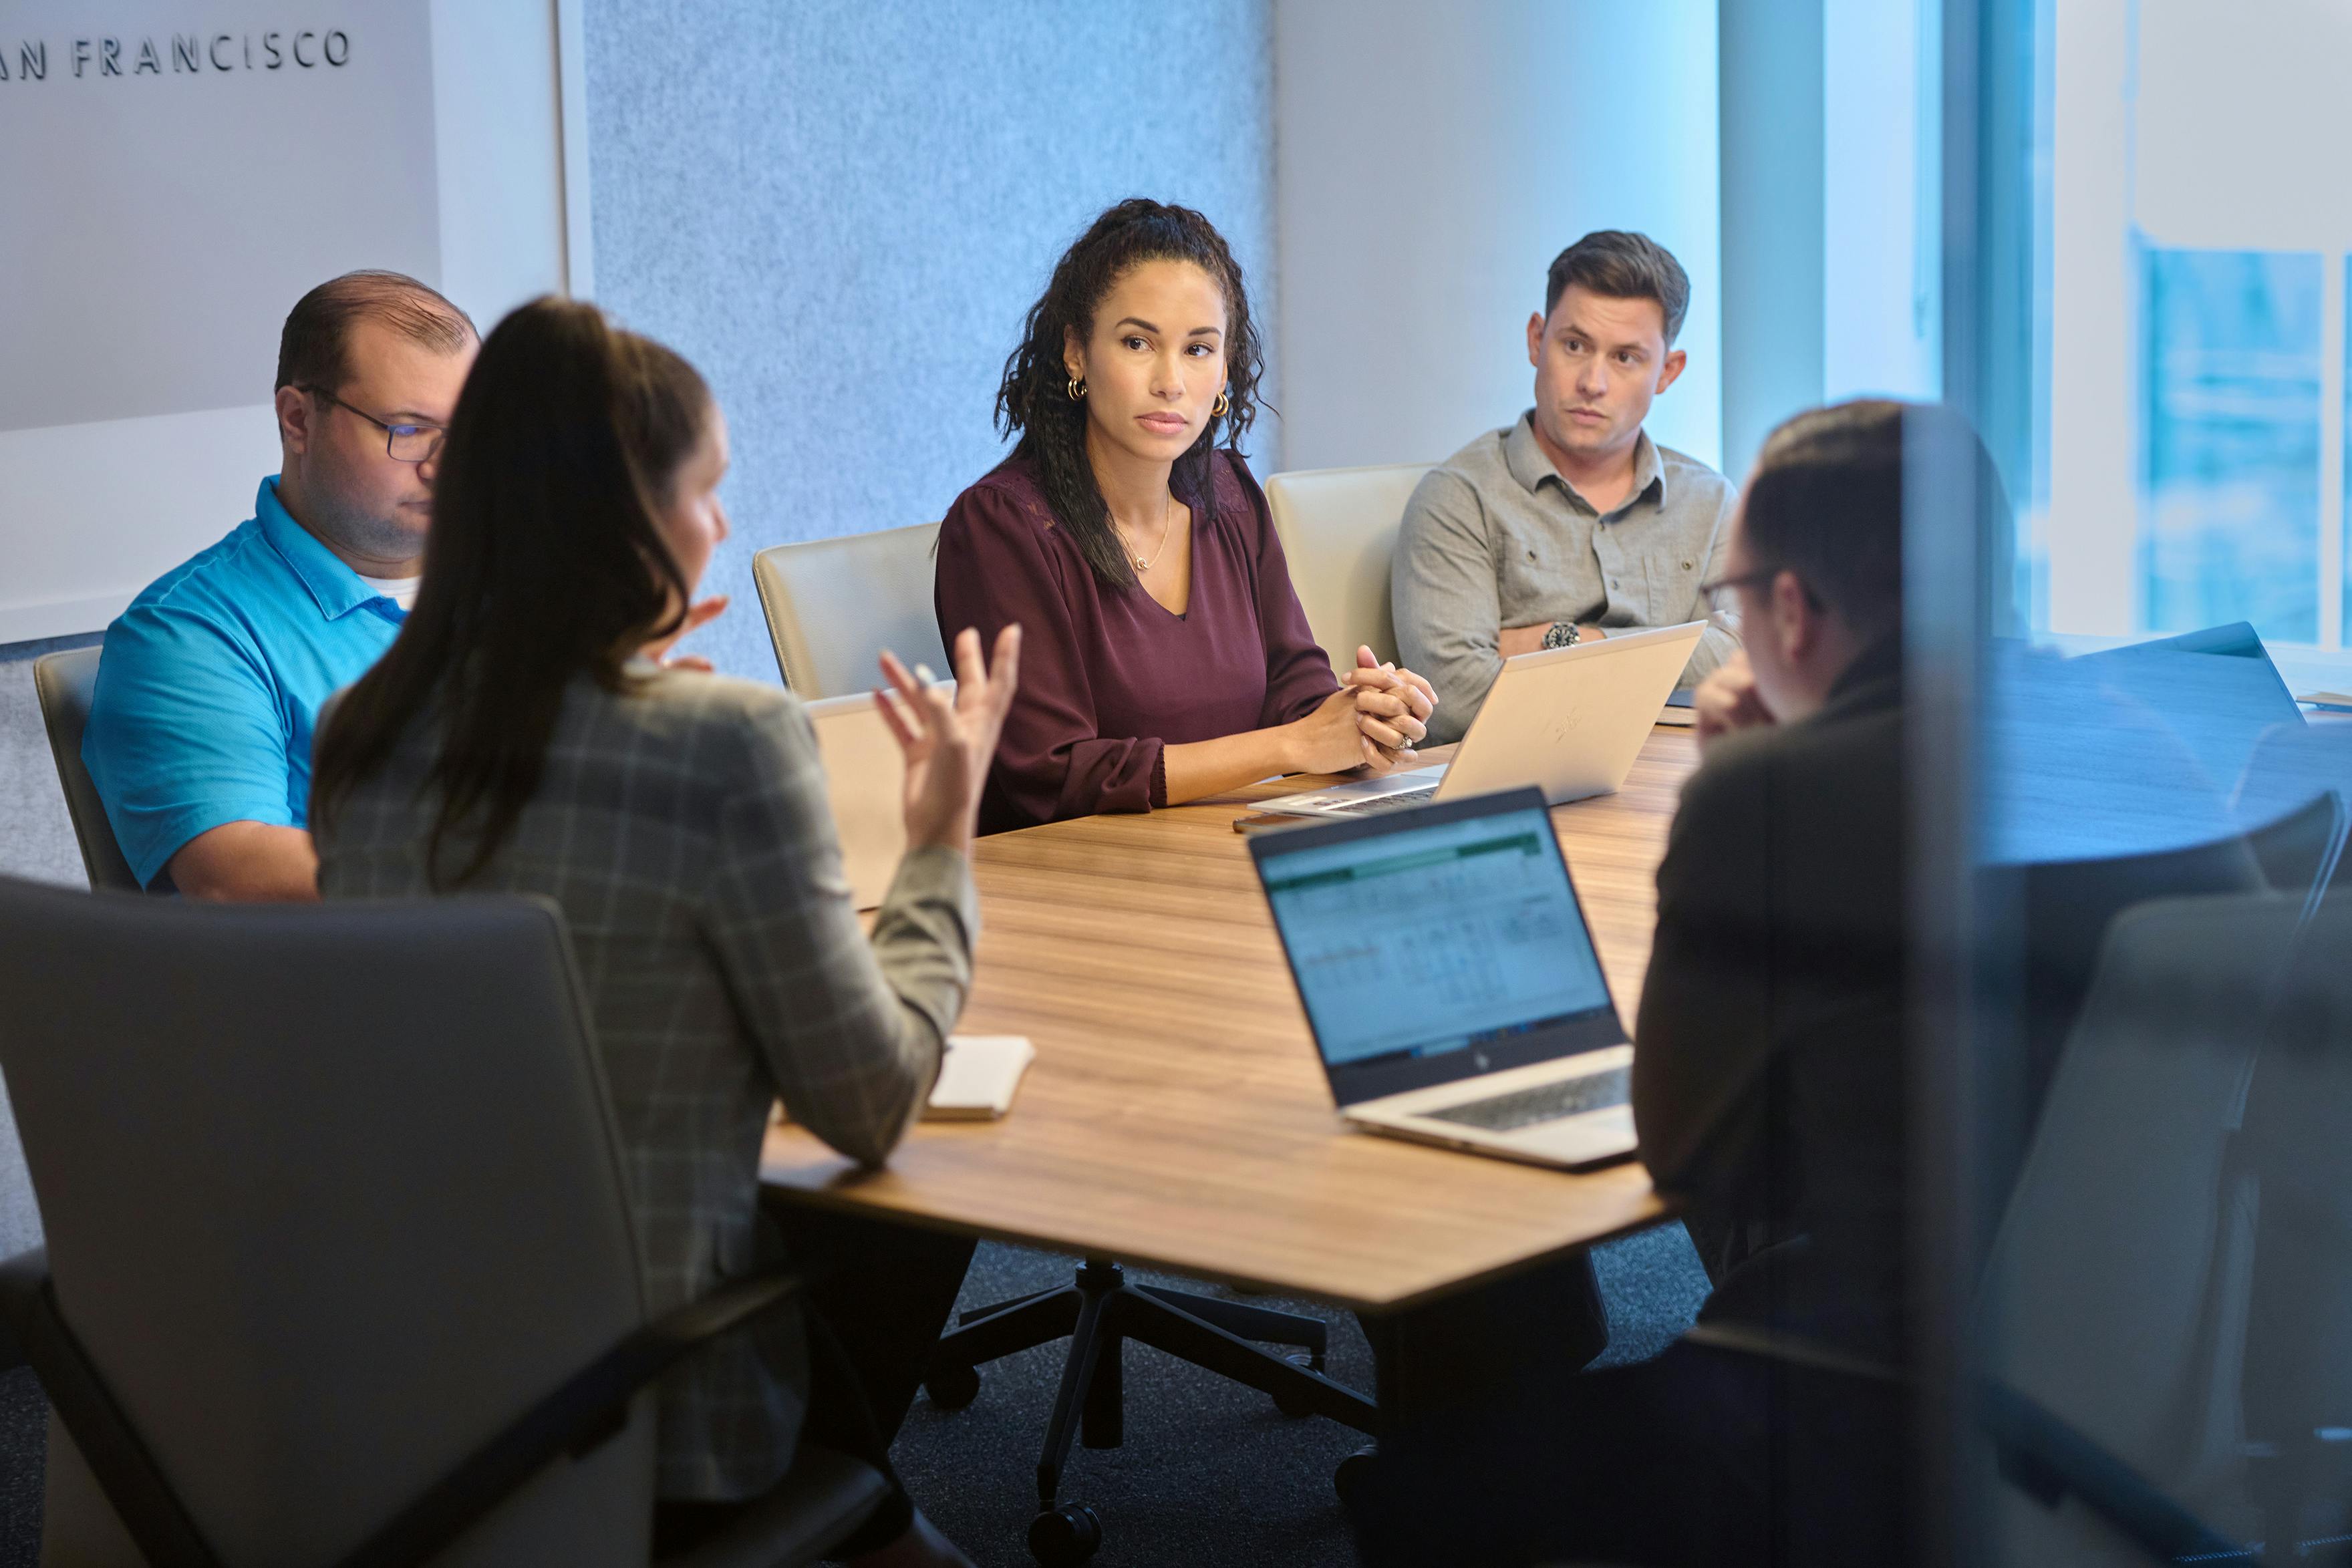 Employees are gathered in a small conference room, tightly packed around a central table. The employee at the head of the table gestures while presenting.